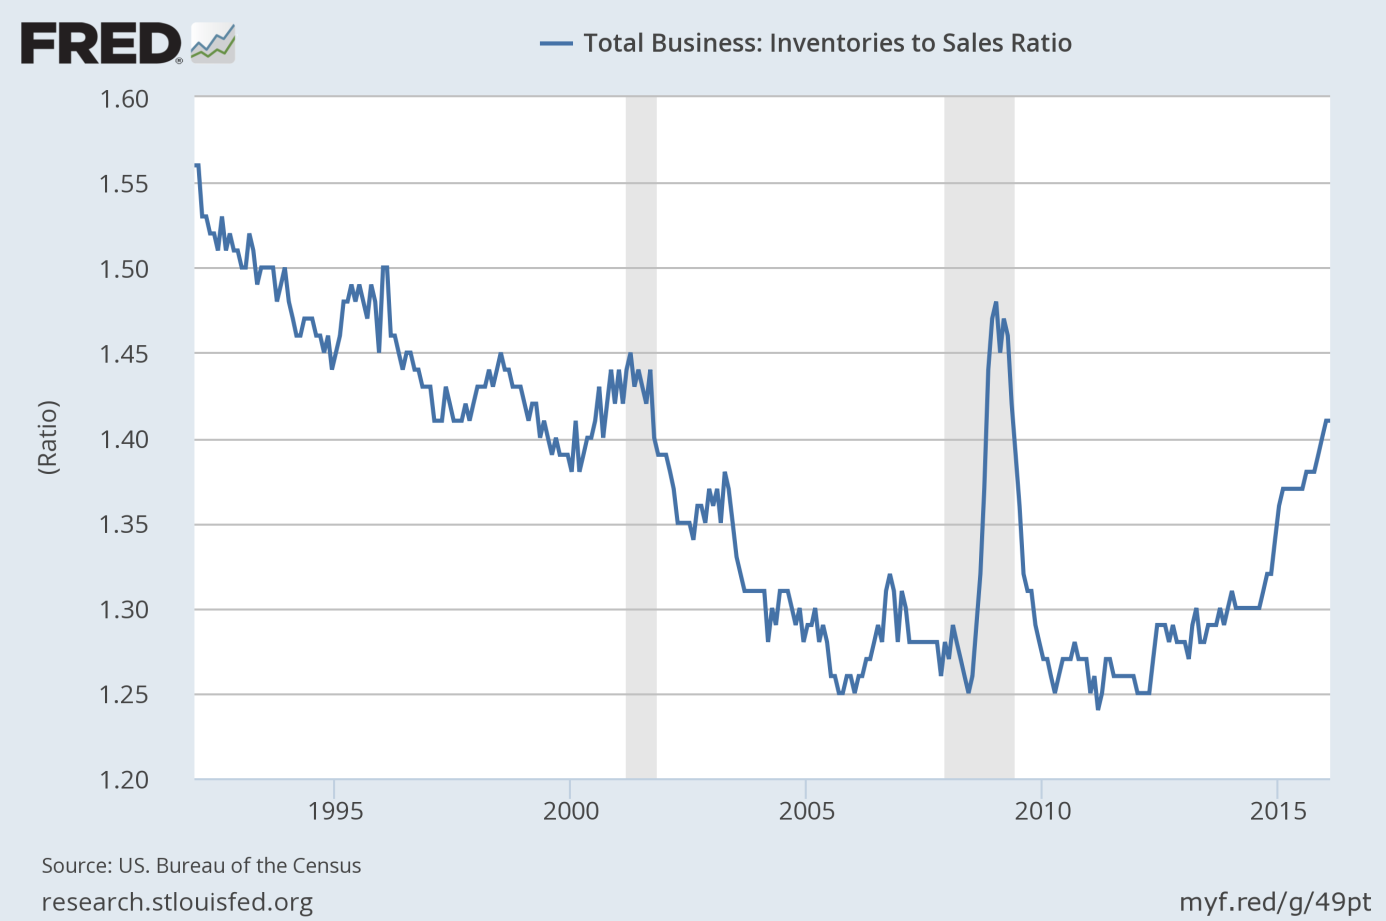 Total business inventories to sales ratio